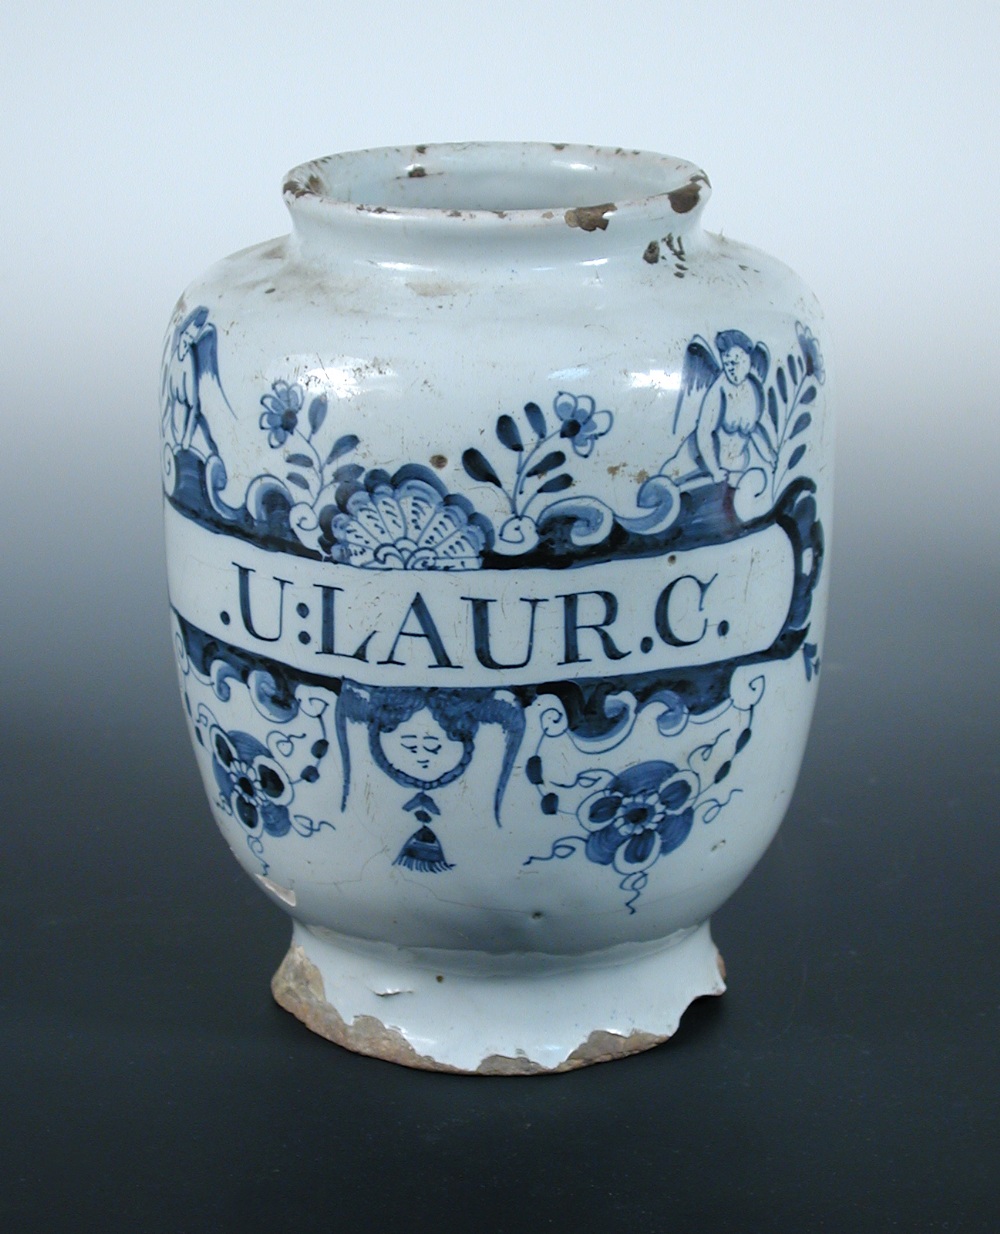 A mid 18th century English Delft blue and white drug jar, possibly London, painted with a cherub